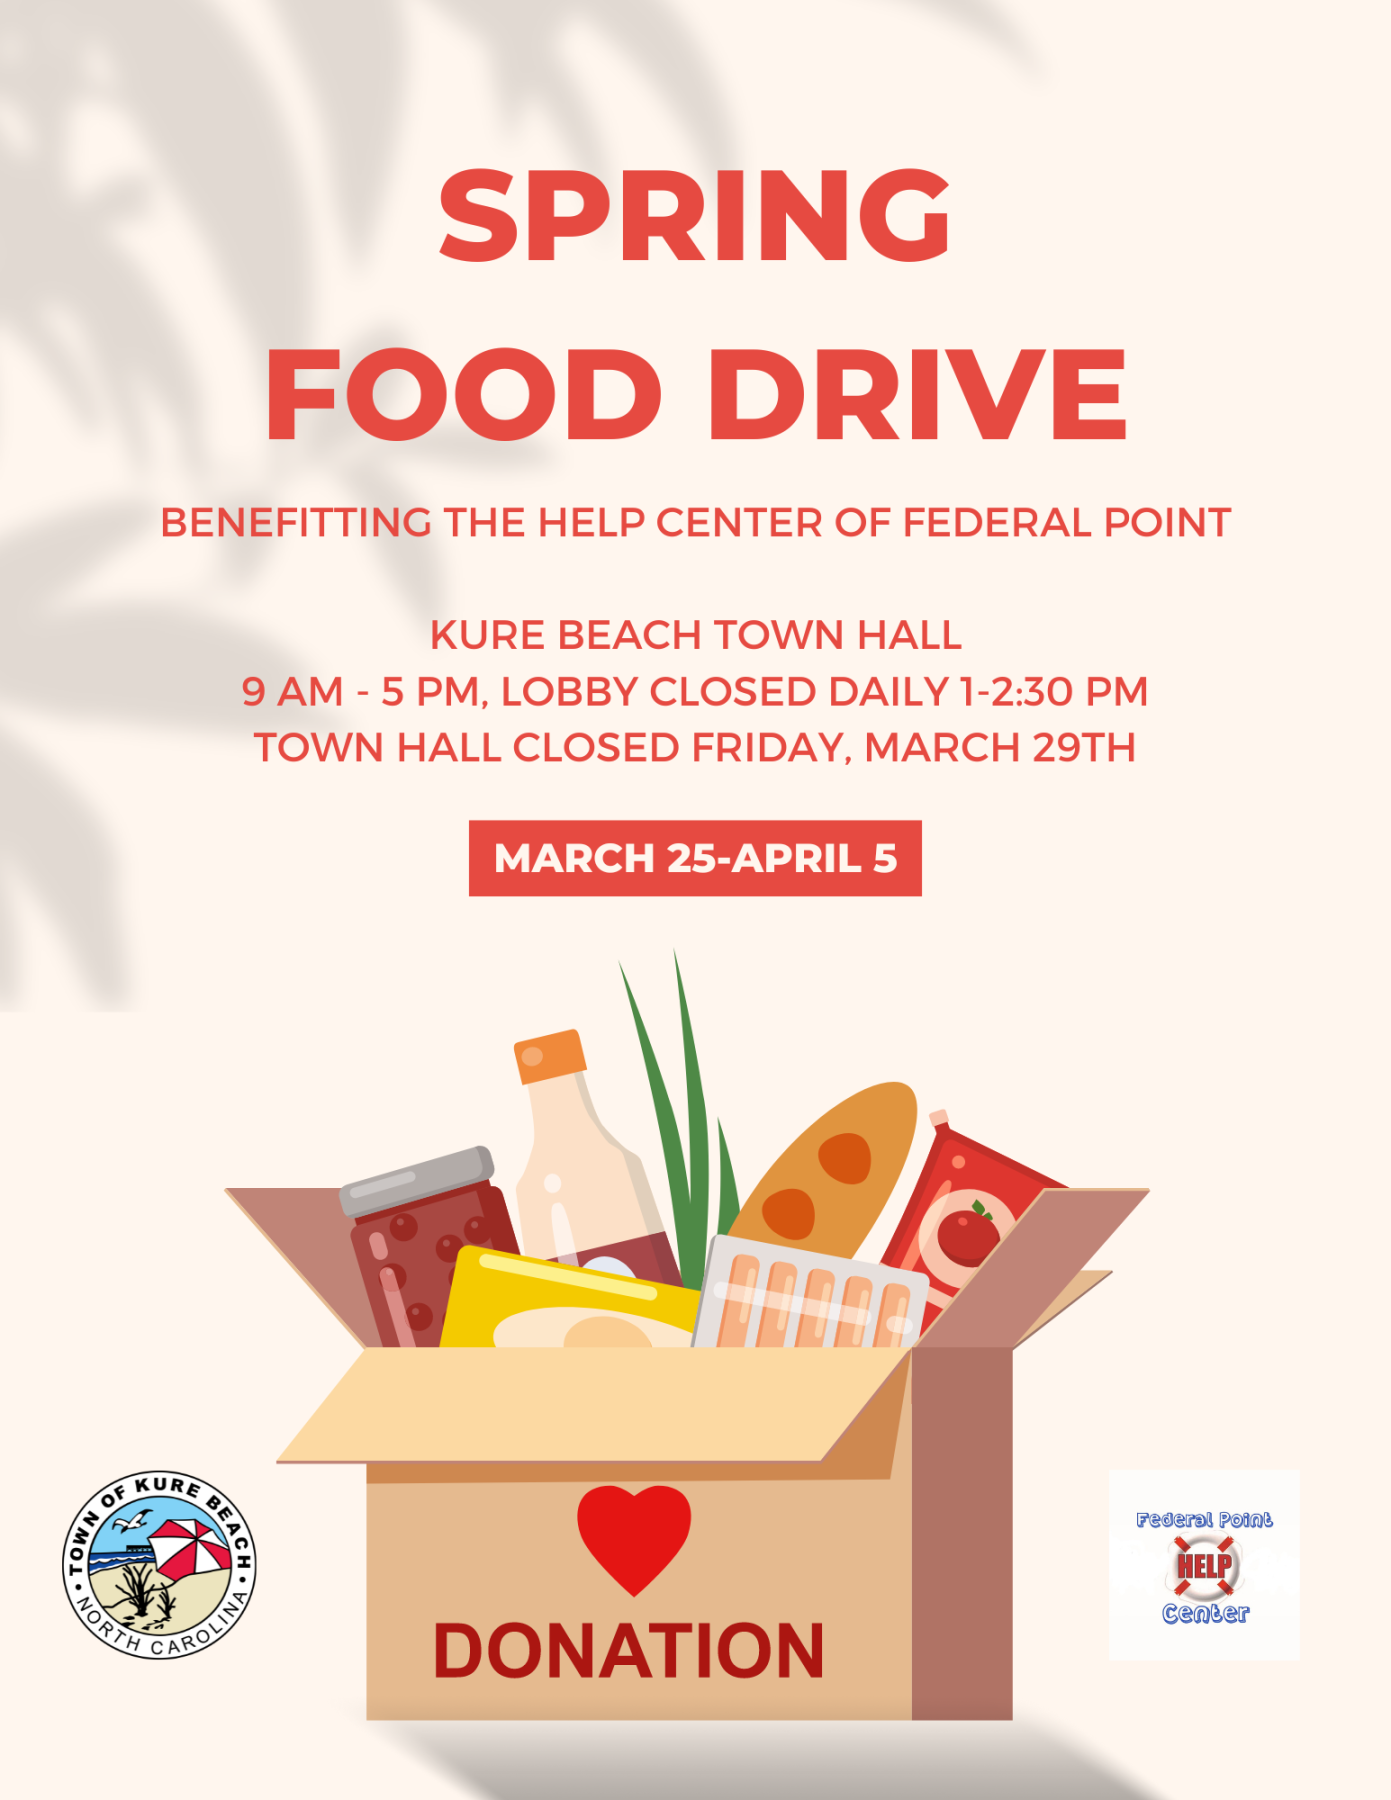 Food Drive Details with image of bag of groceries